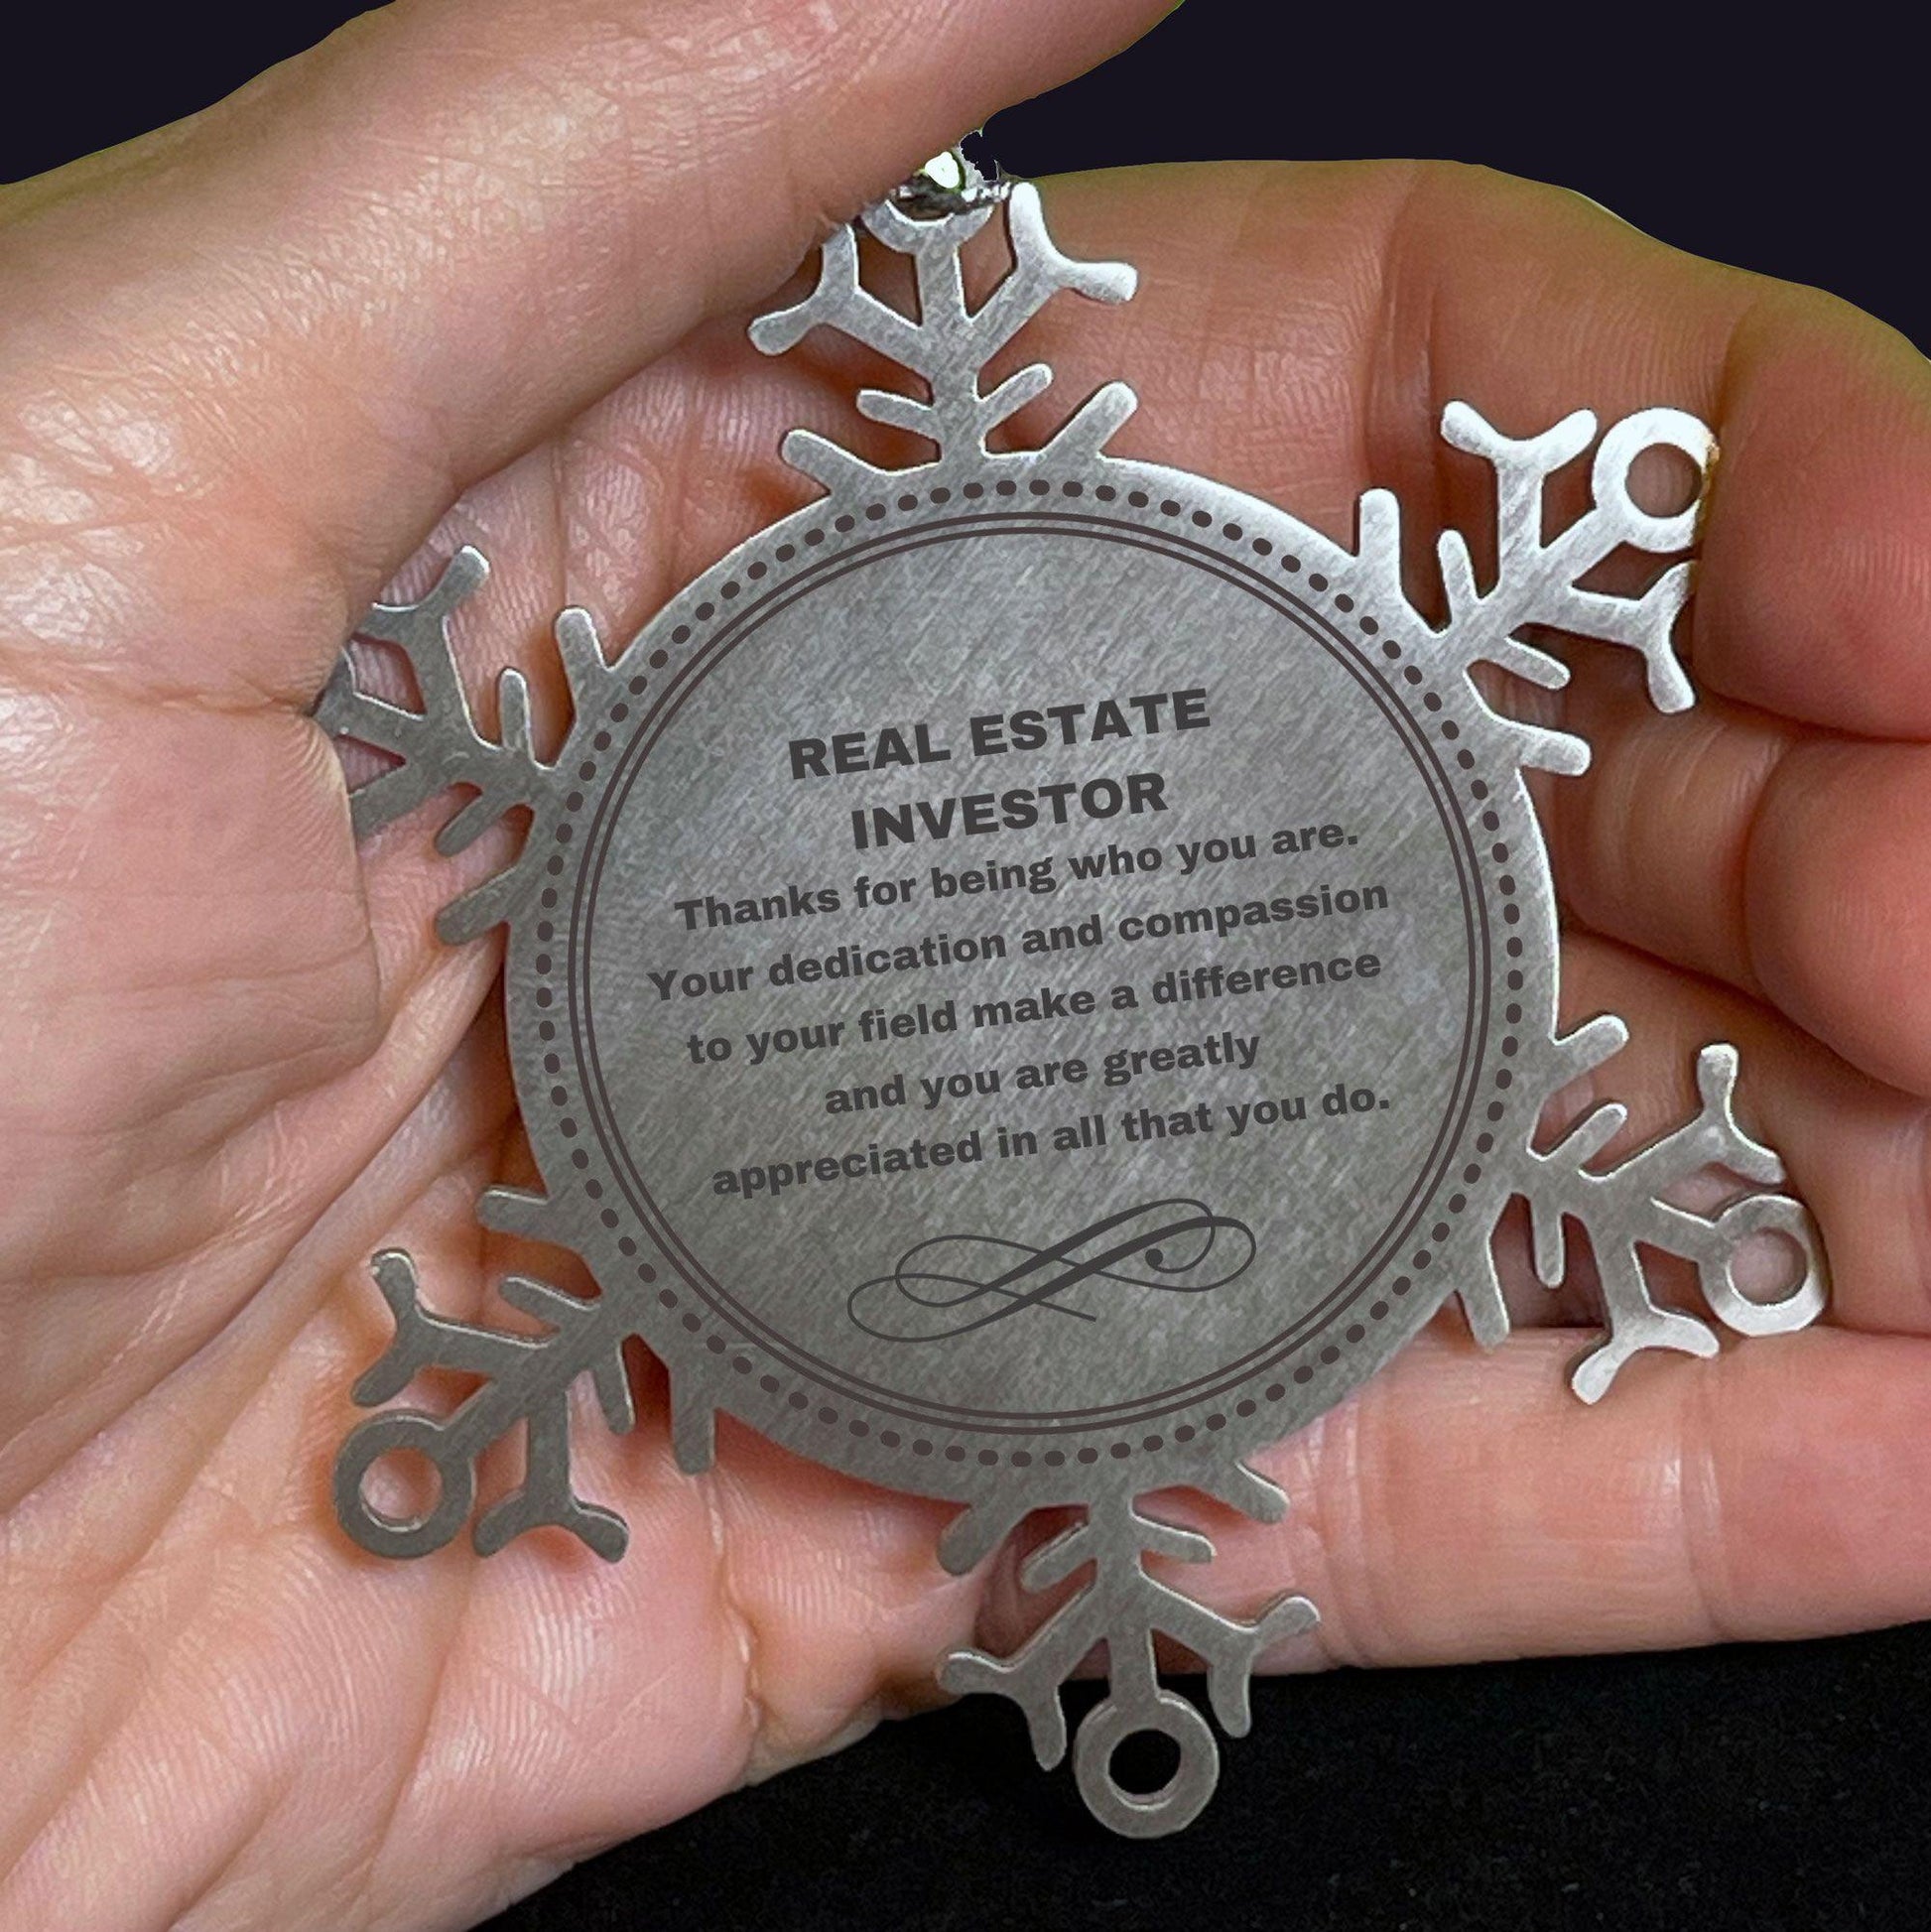 Real Estate Investor Snowflake Ornament - Thanks for being who you are - Birthday Christmas Jewelry Gifts Coworkers Colleague Boss - Mallard Moon Gift Shop